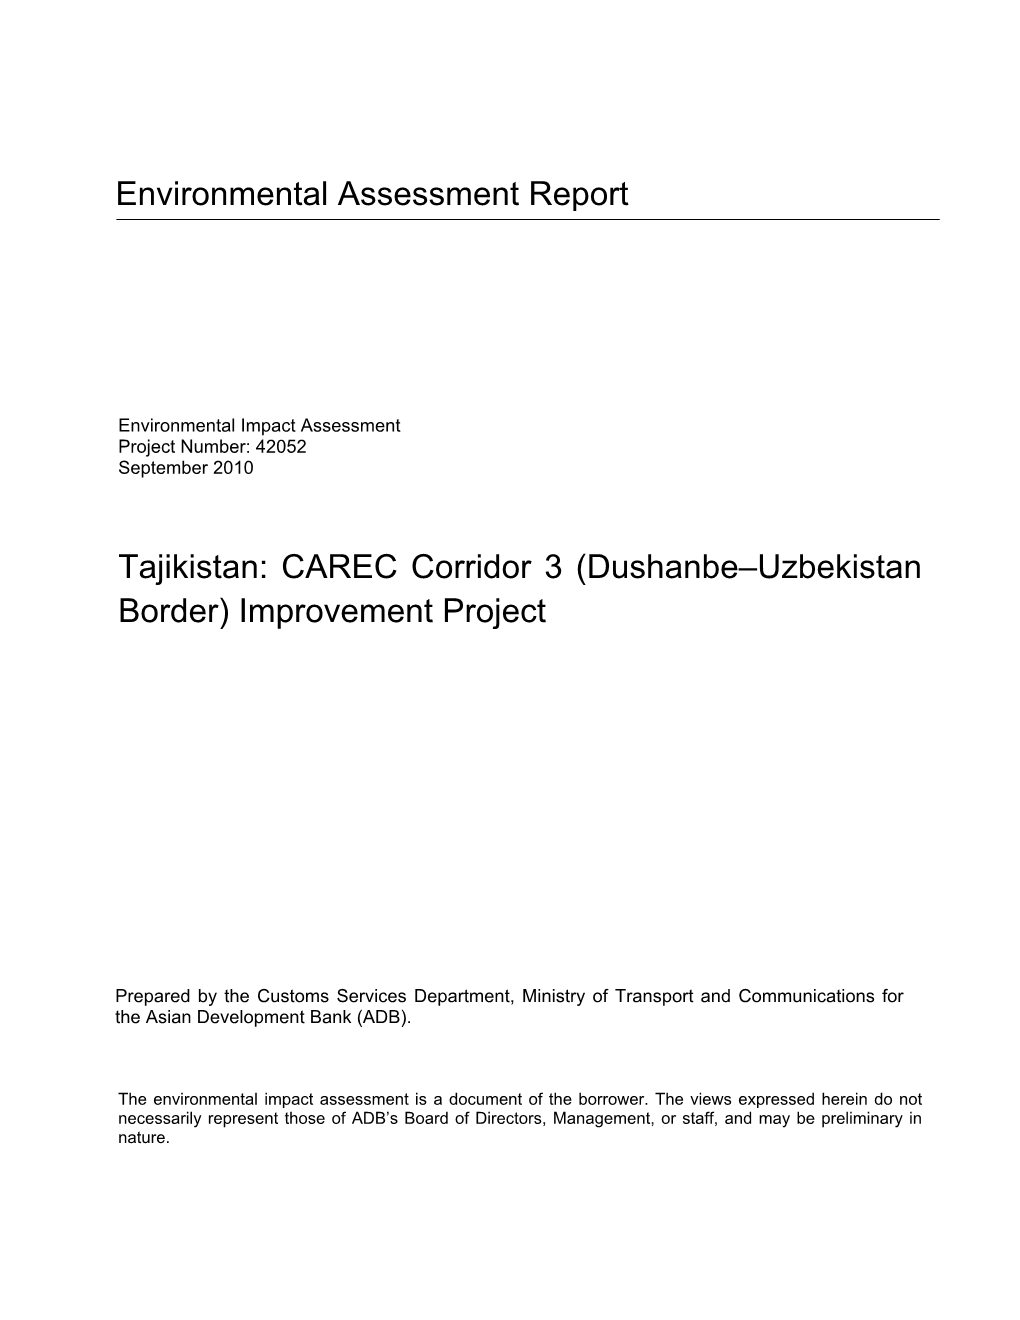 Environmental Impact Assessment Project Number: 42052 September 2010